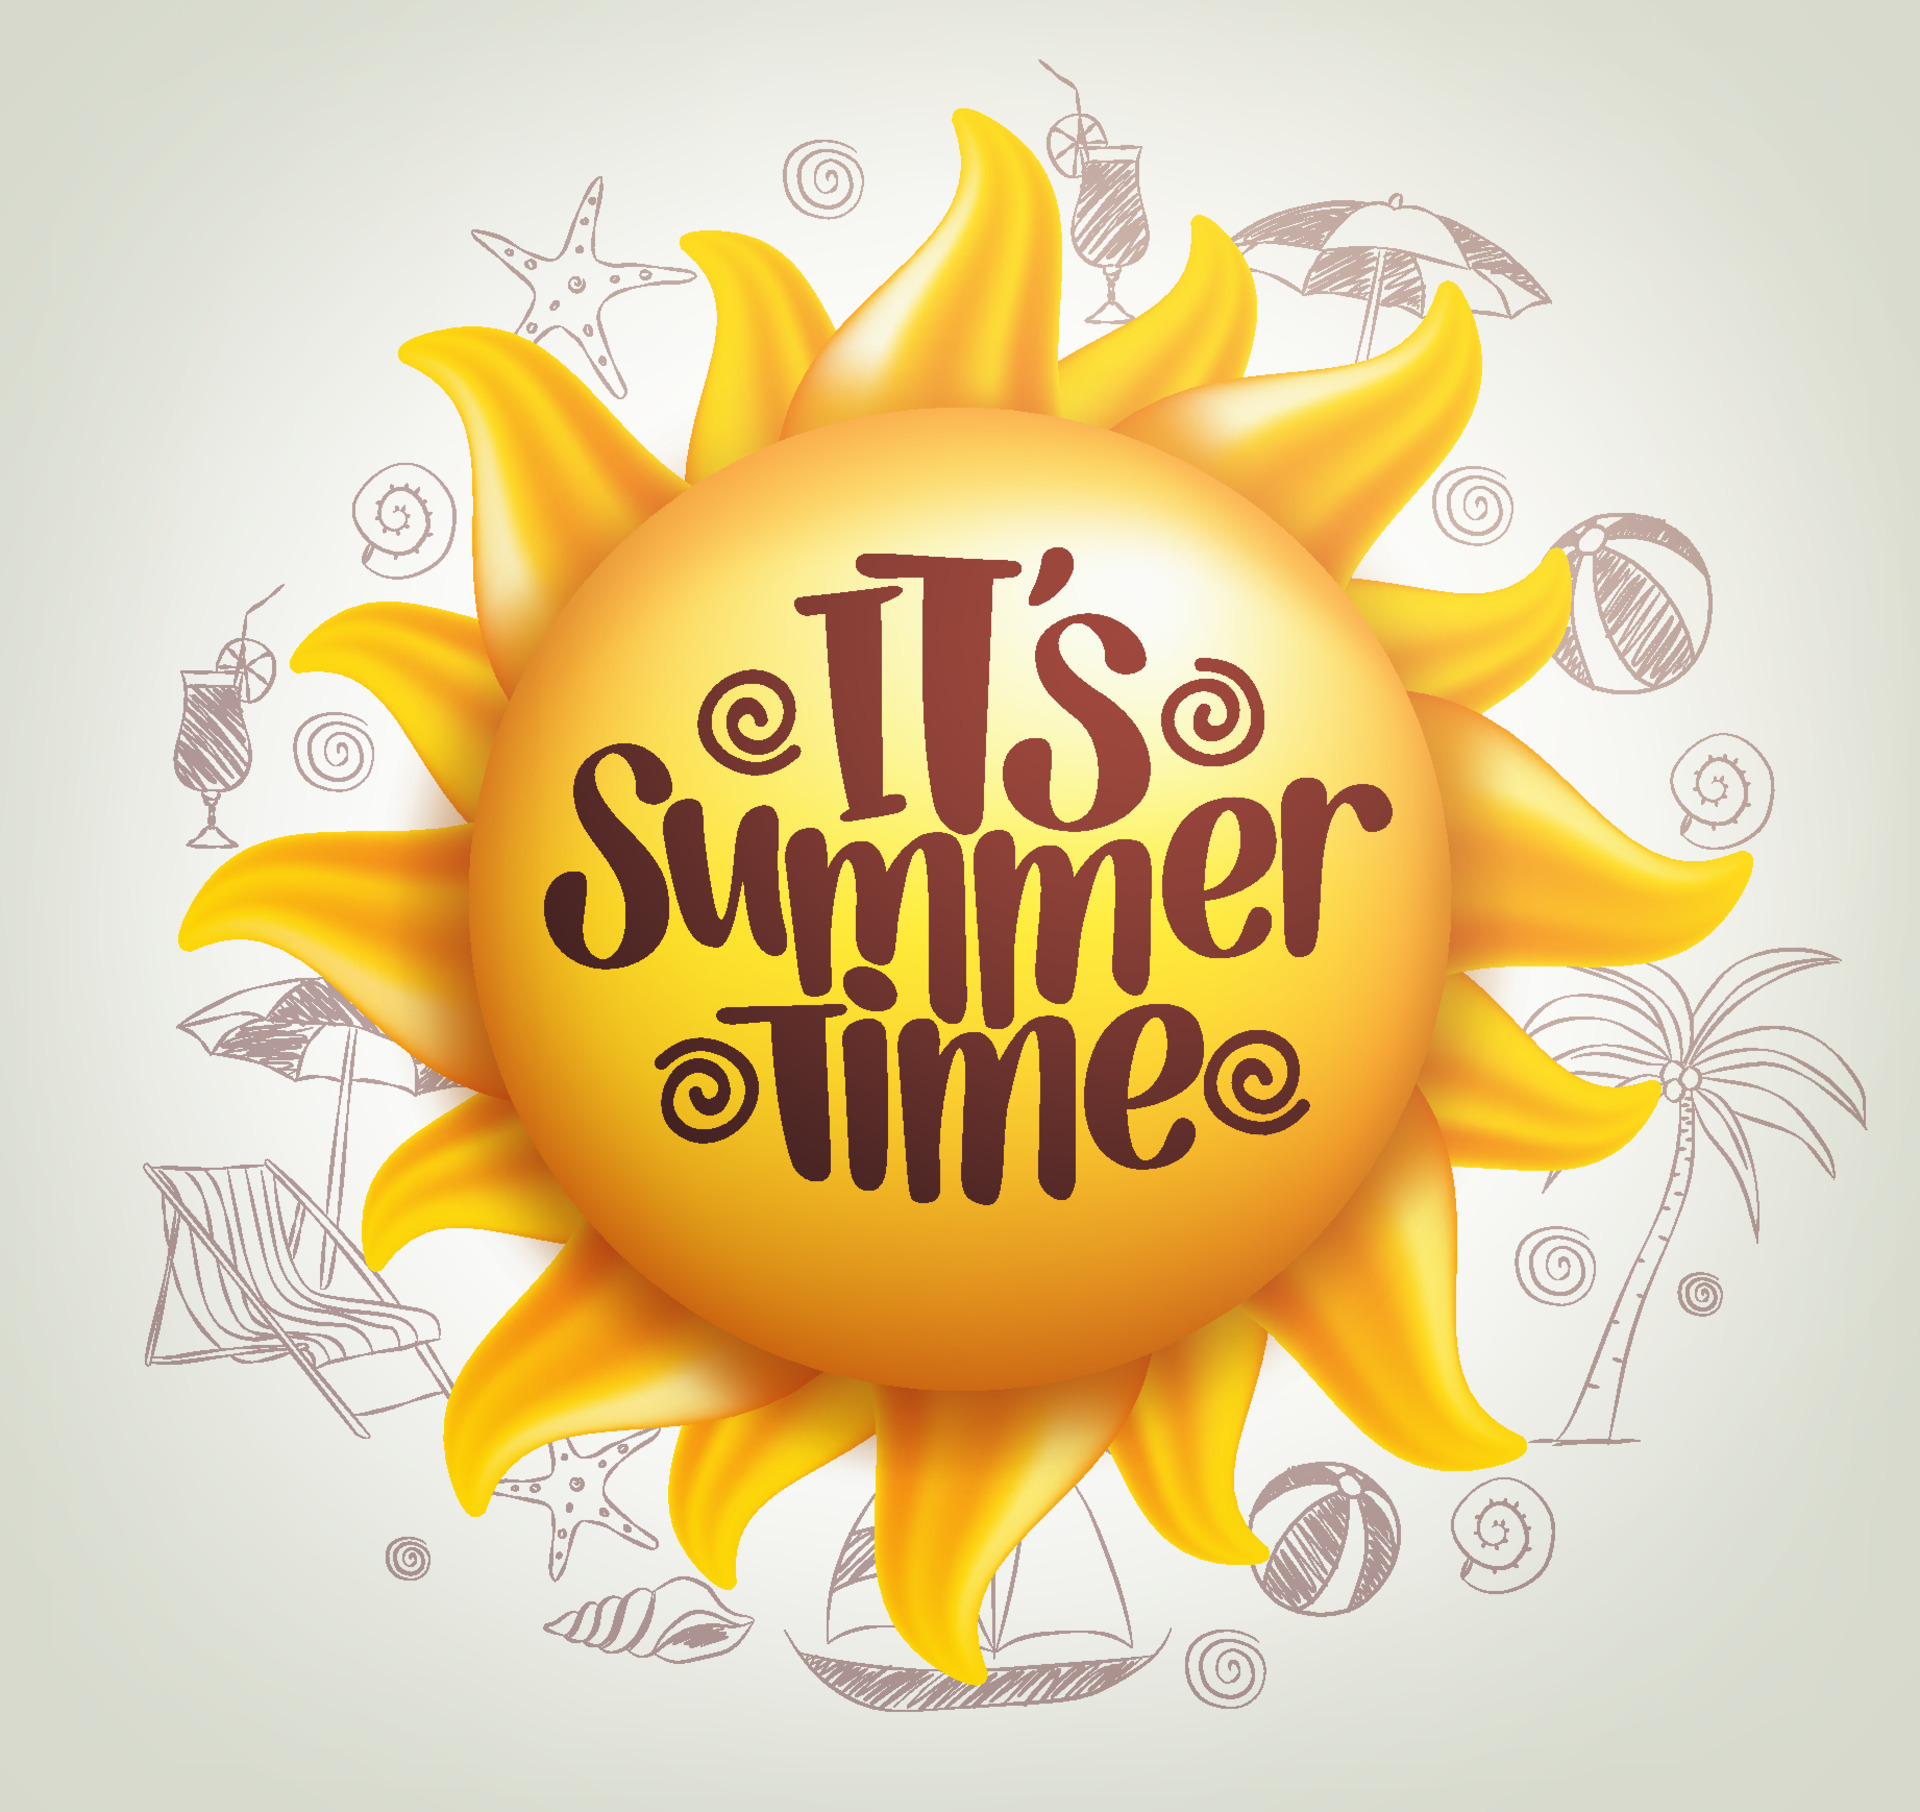 3D Realistic Sun Vector with Summer Time Title in a Background with ...